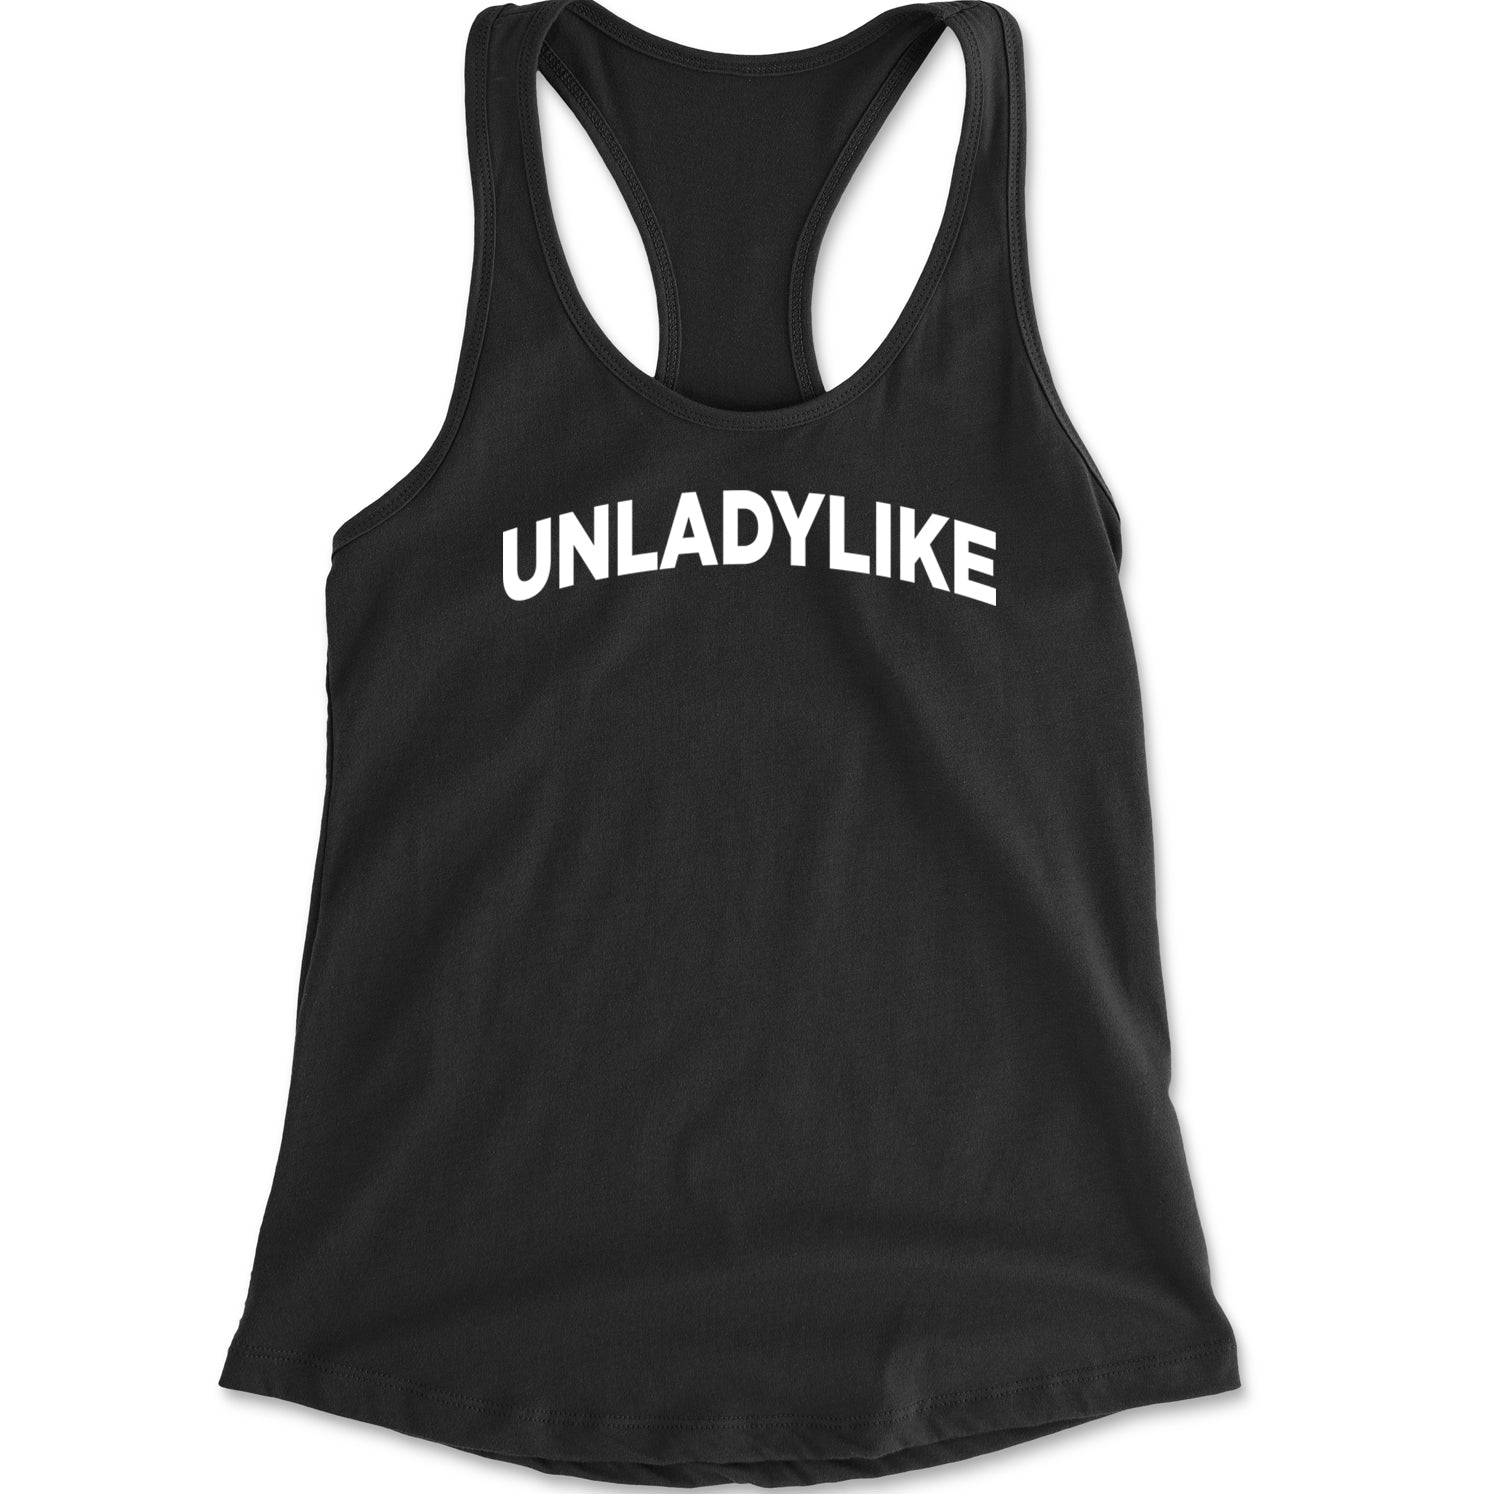 Unladylike Embrace Your Unique Strength Racerback Tank Top for Women